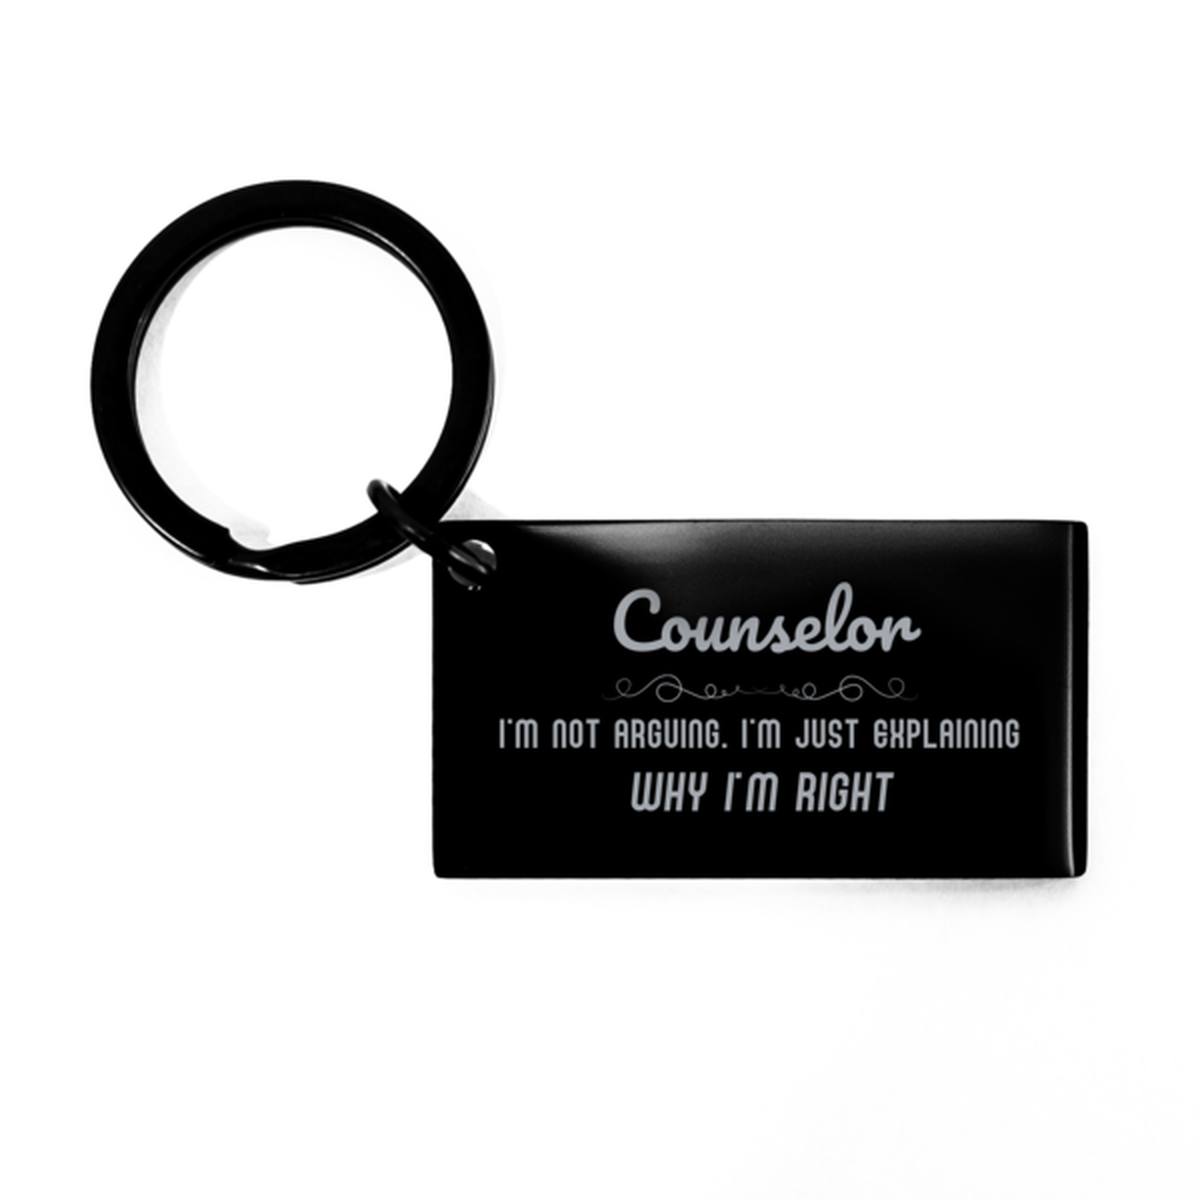 Counselor I'm not Arguing. I'm Just Explaining Why I'm RIGHT Keychain, Funny Saying Quote Counselor Gifts For Counselor Graduation Birthday Christmas Gifts for Men Women Coworker